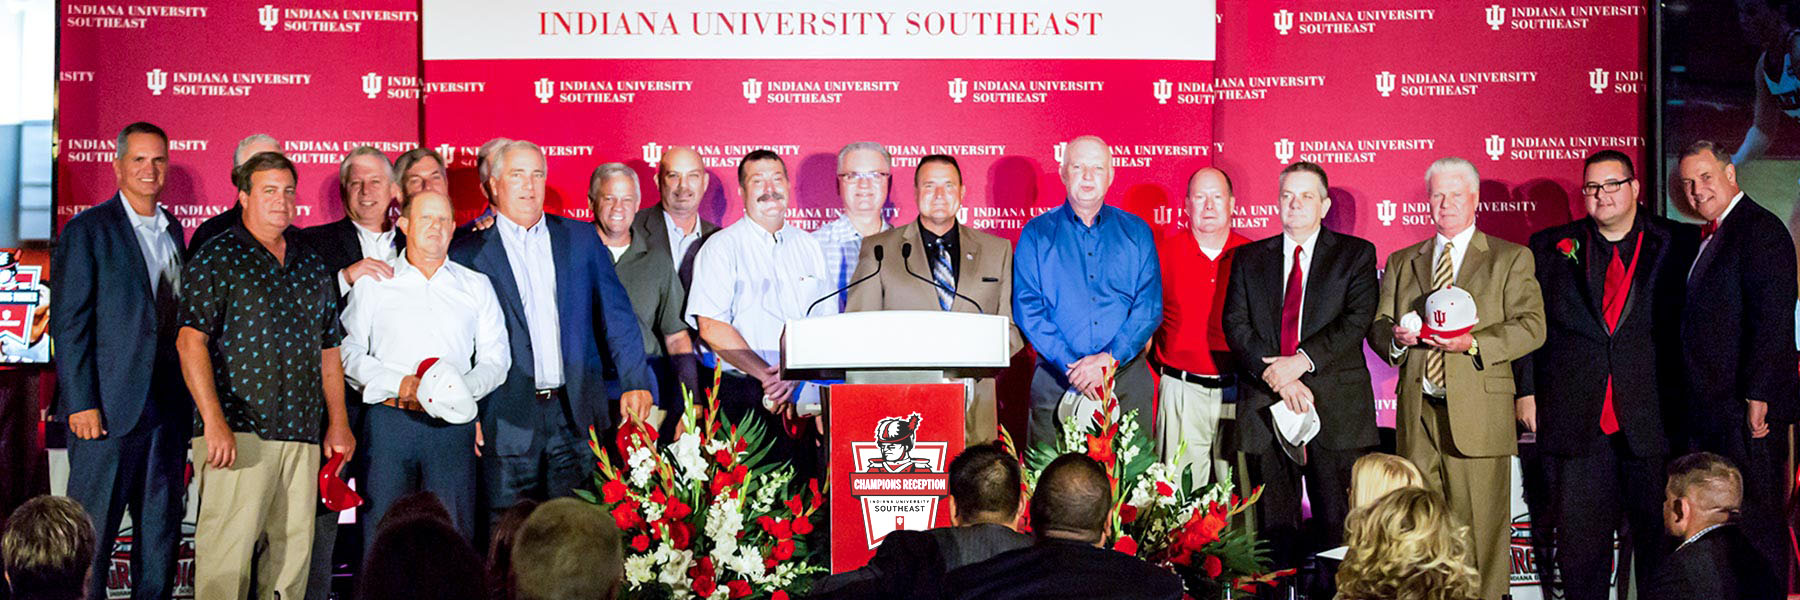 Group of men posing in front of an Indiana University Southeast background with a podium in the middle bearing the logo for the Champions Reception